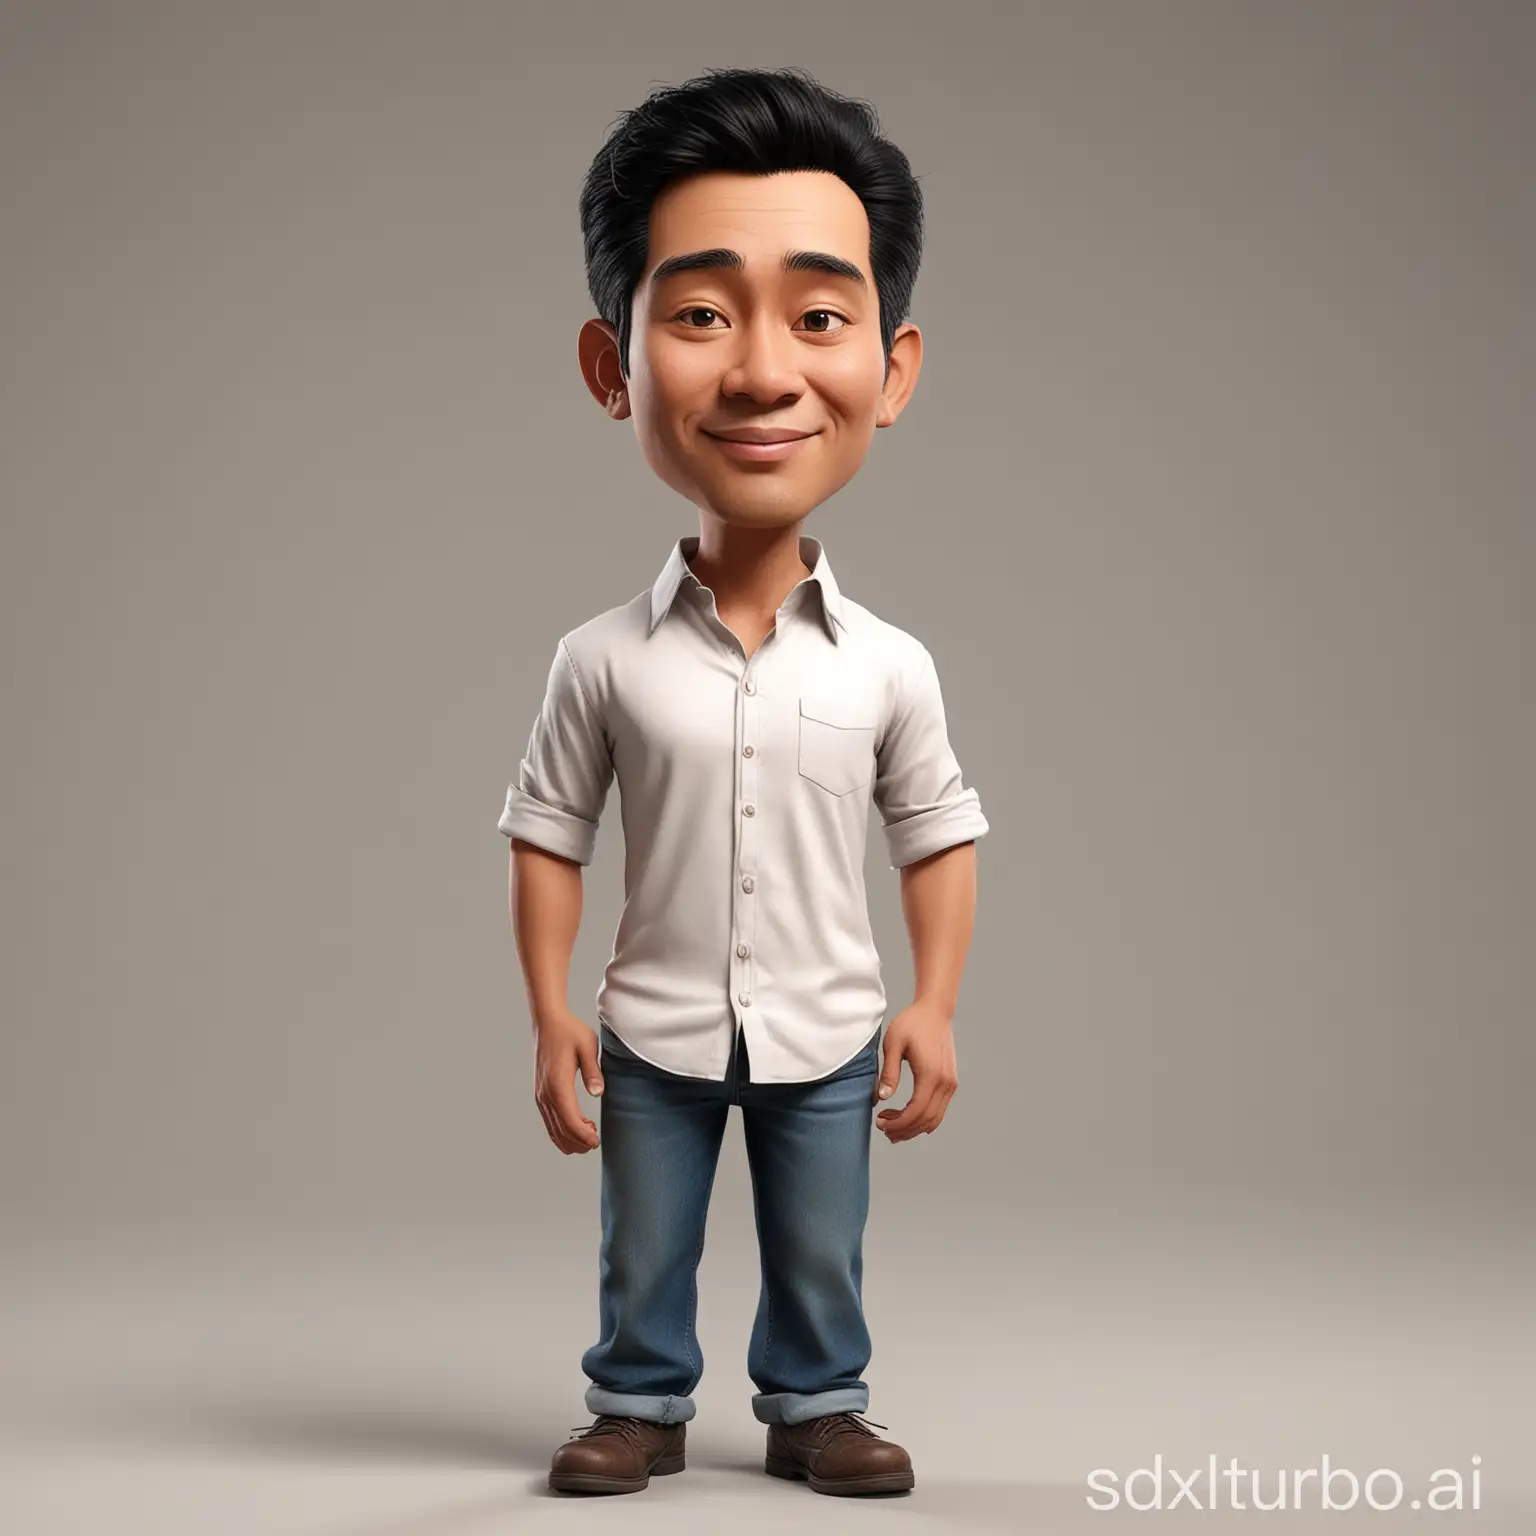 Create 3D cartoon style full body with a big head. A 50 year old Indonesian man. Tall, slightly thin body, oval face shape. Oval chin, handsome, slightly round eyes, clean white skin, faint smile. Black hair with a side part. Wearing a white shirt. Body position is clearly visible. Background colored peach solid. Use soft photography lighting, hair lighting, top lighting, side lighting. Highest quality photos, Uhd,16k.